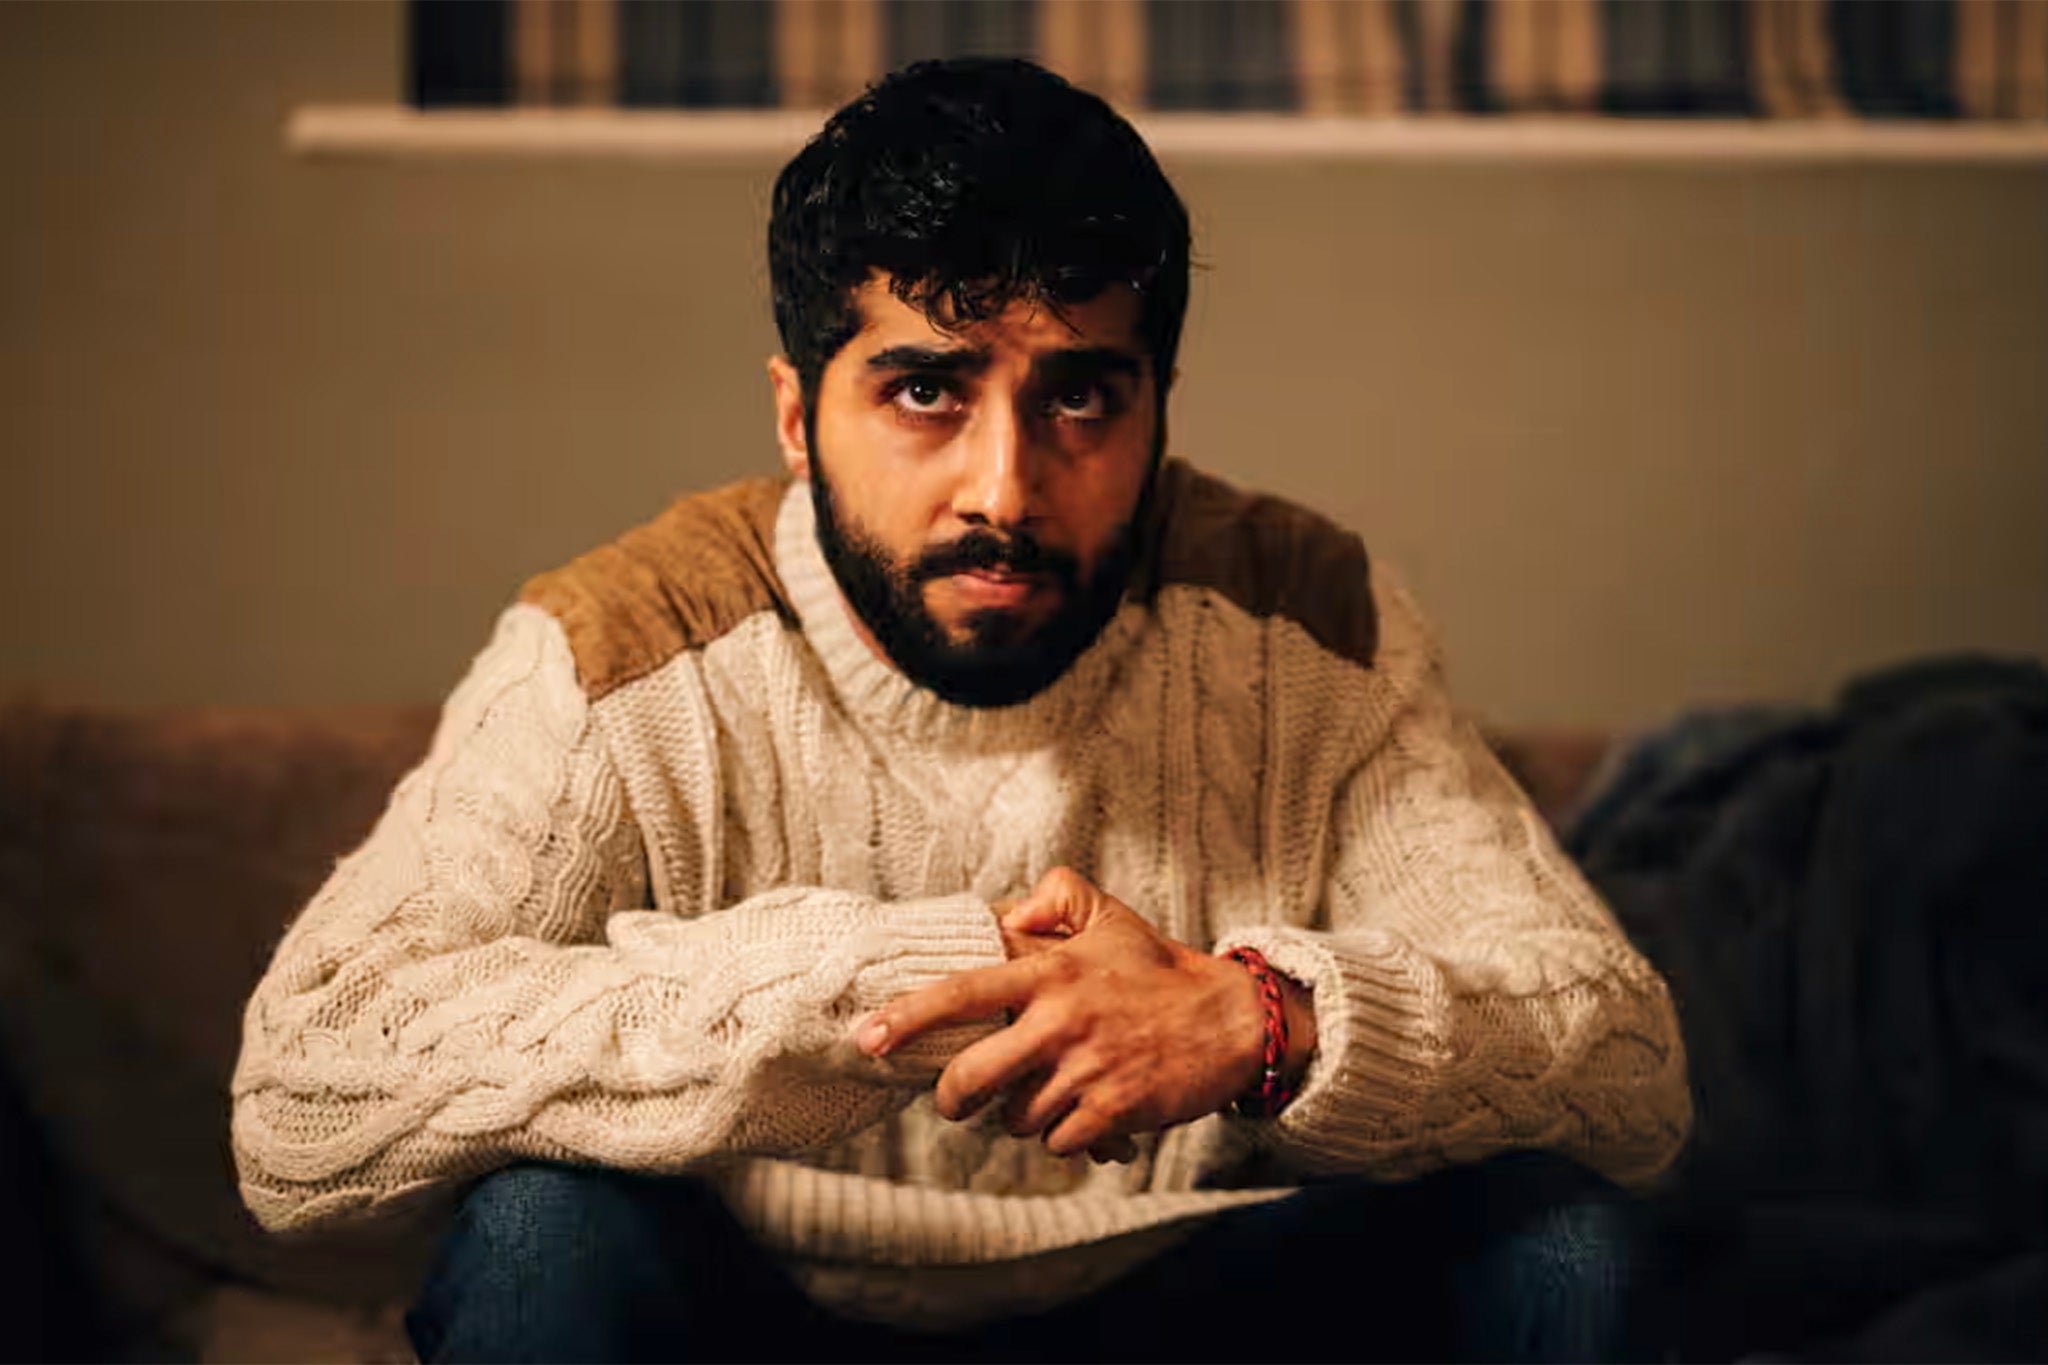 Online harms: Chaneil Kular is wrongly identified as a terrorist in the British film